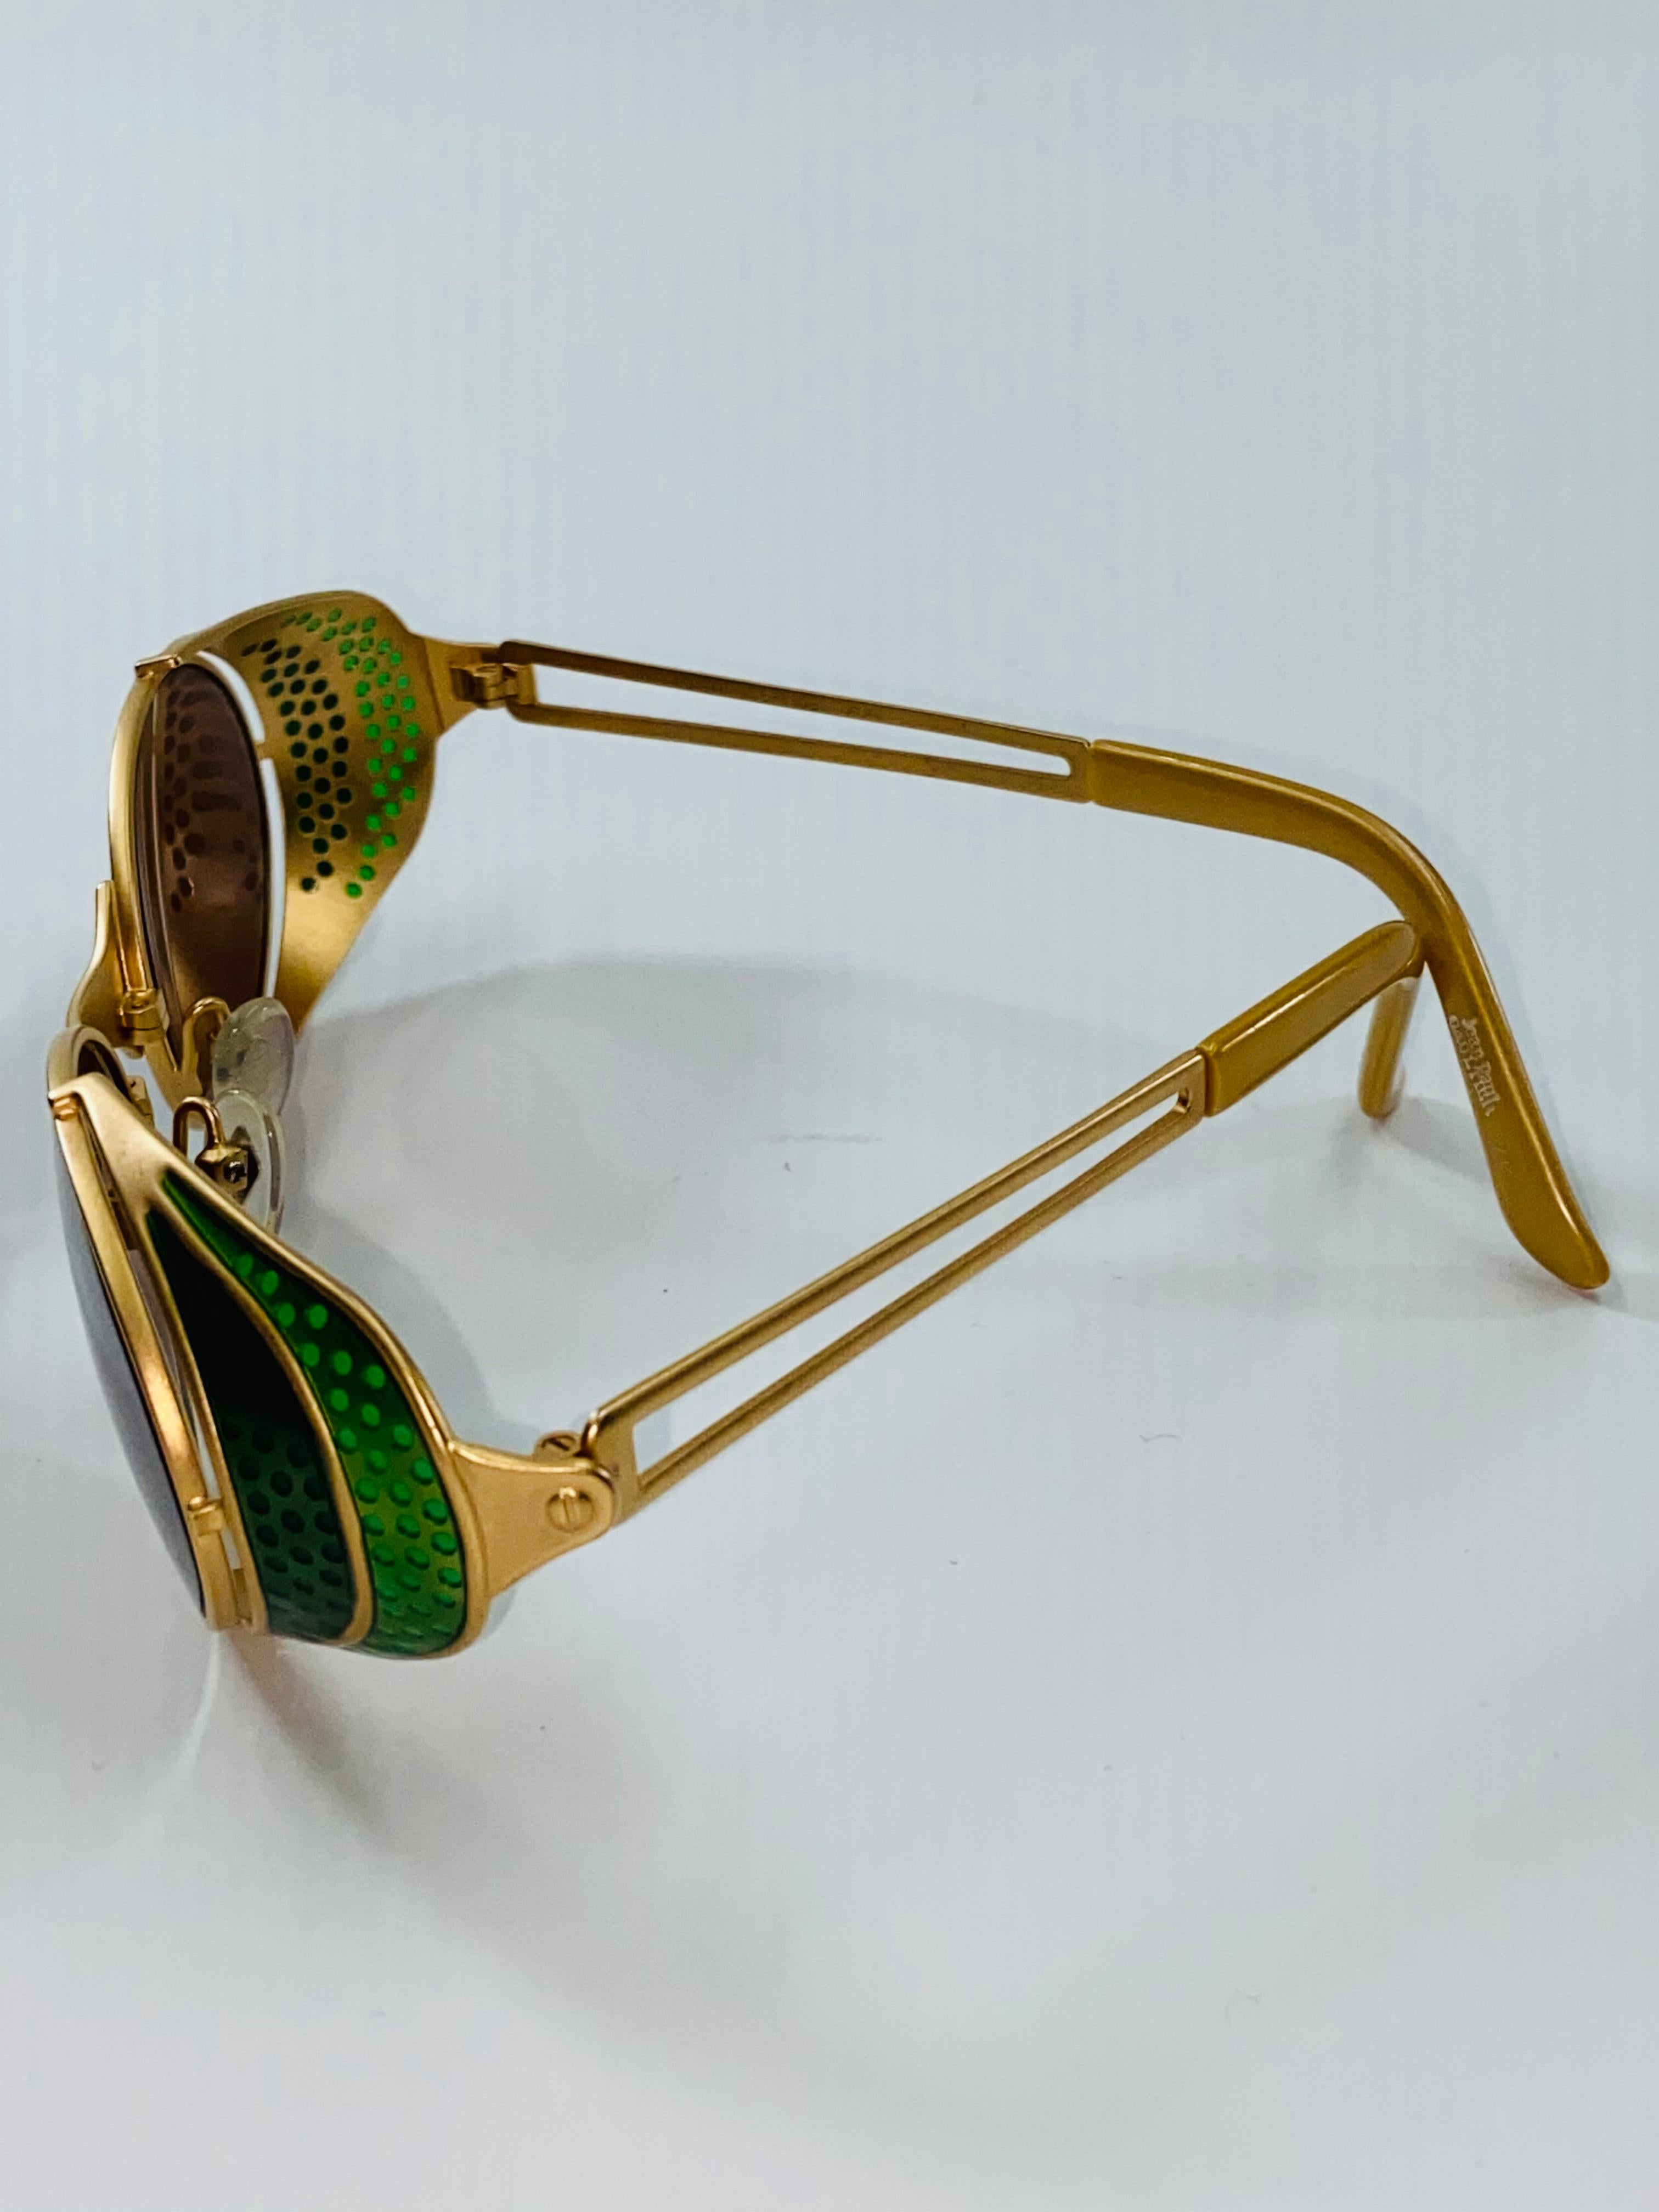 Jean Paul Gaultier Rare Vintage Green Enamel & Gold Steampunk Sunglasses In Good Condition For Sale In Los Angeles, CA